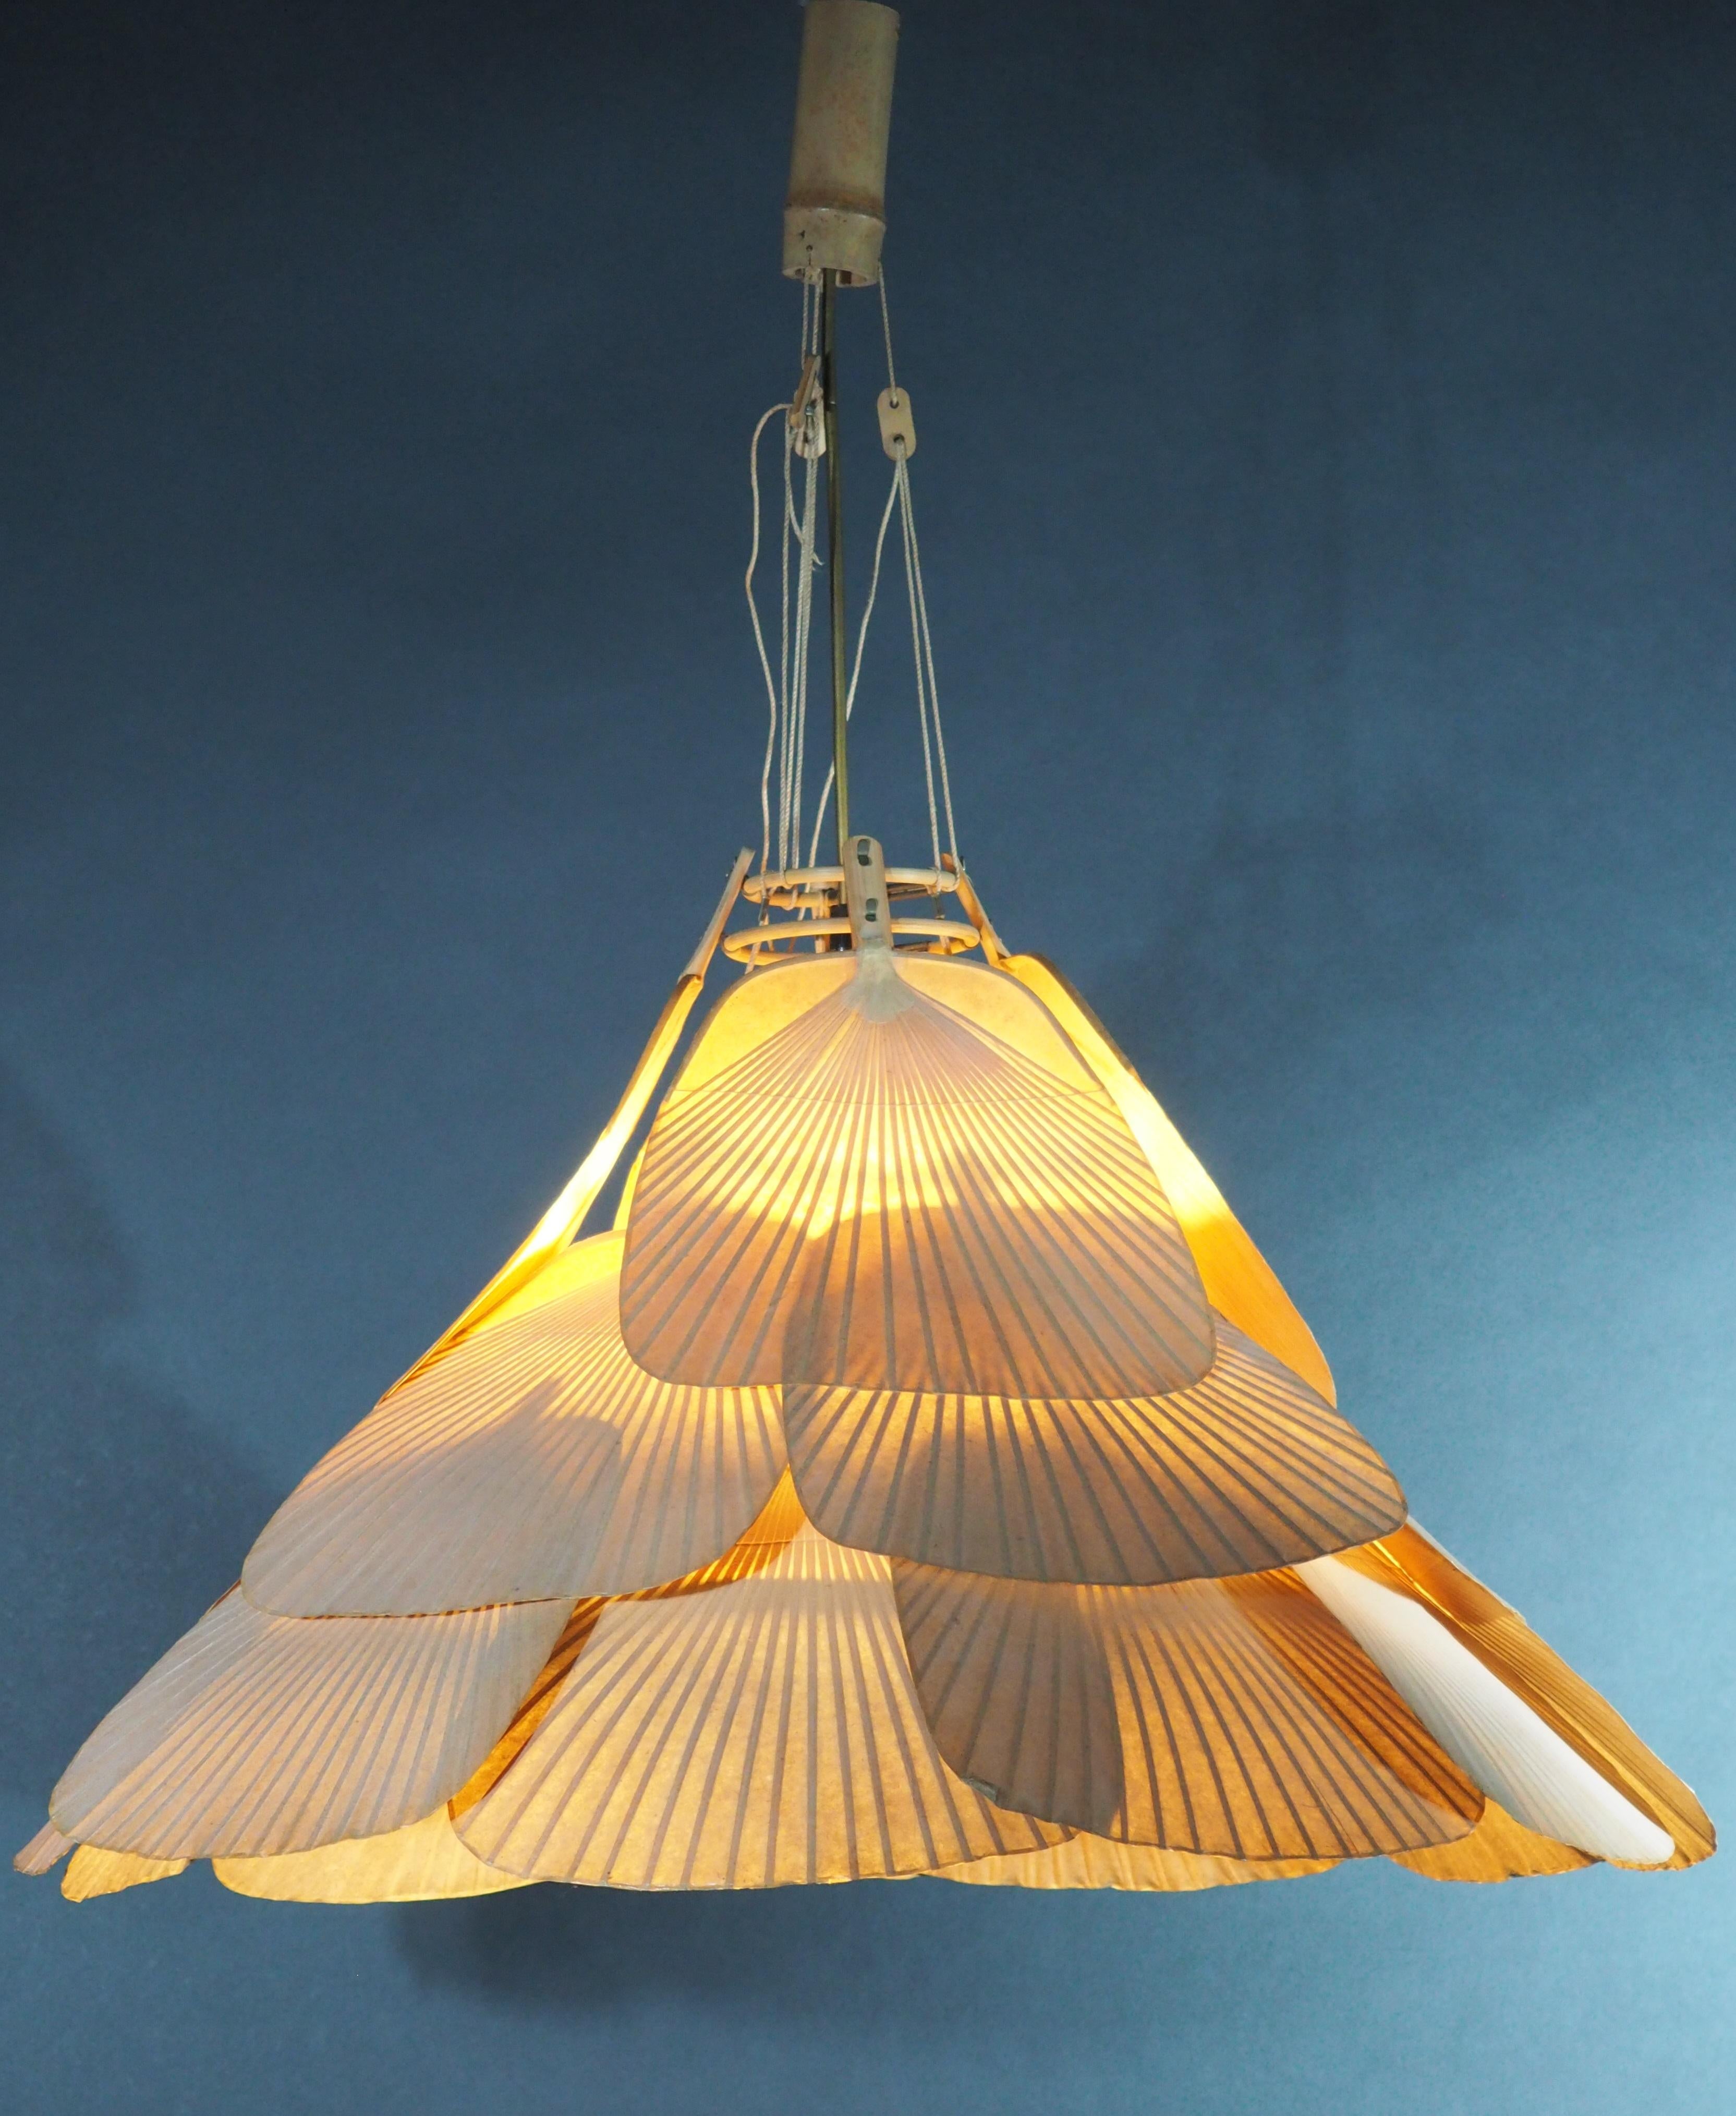 An exceptional Uchiwa bamboo fan chandelier or pendant lamp by Ingo Maurer for Design M, 1970s, Germany. Executed in bamboo and 21 rice paper fans.
Socket: 1 x E27 Edison for standard screw bulbs.
Height adjustable by suspension from 3